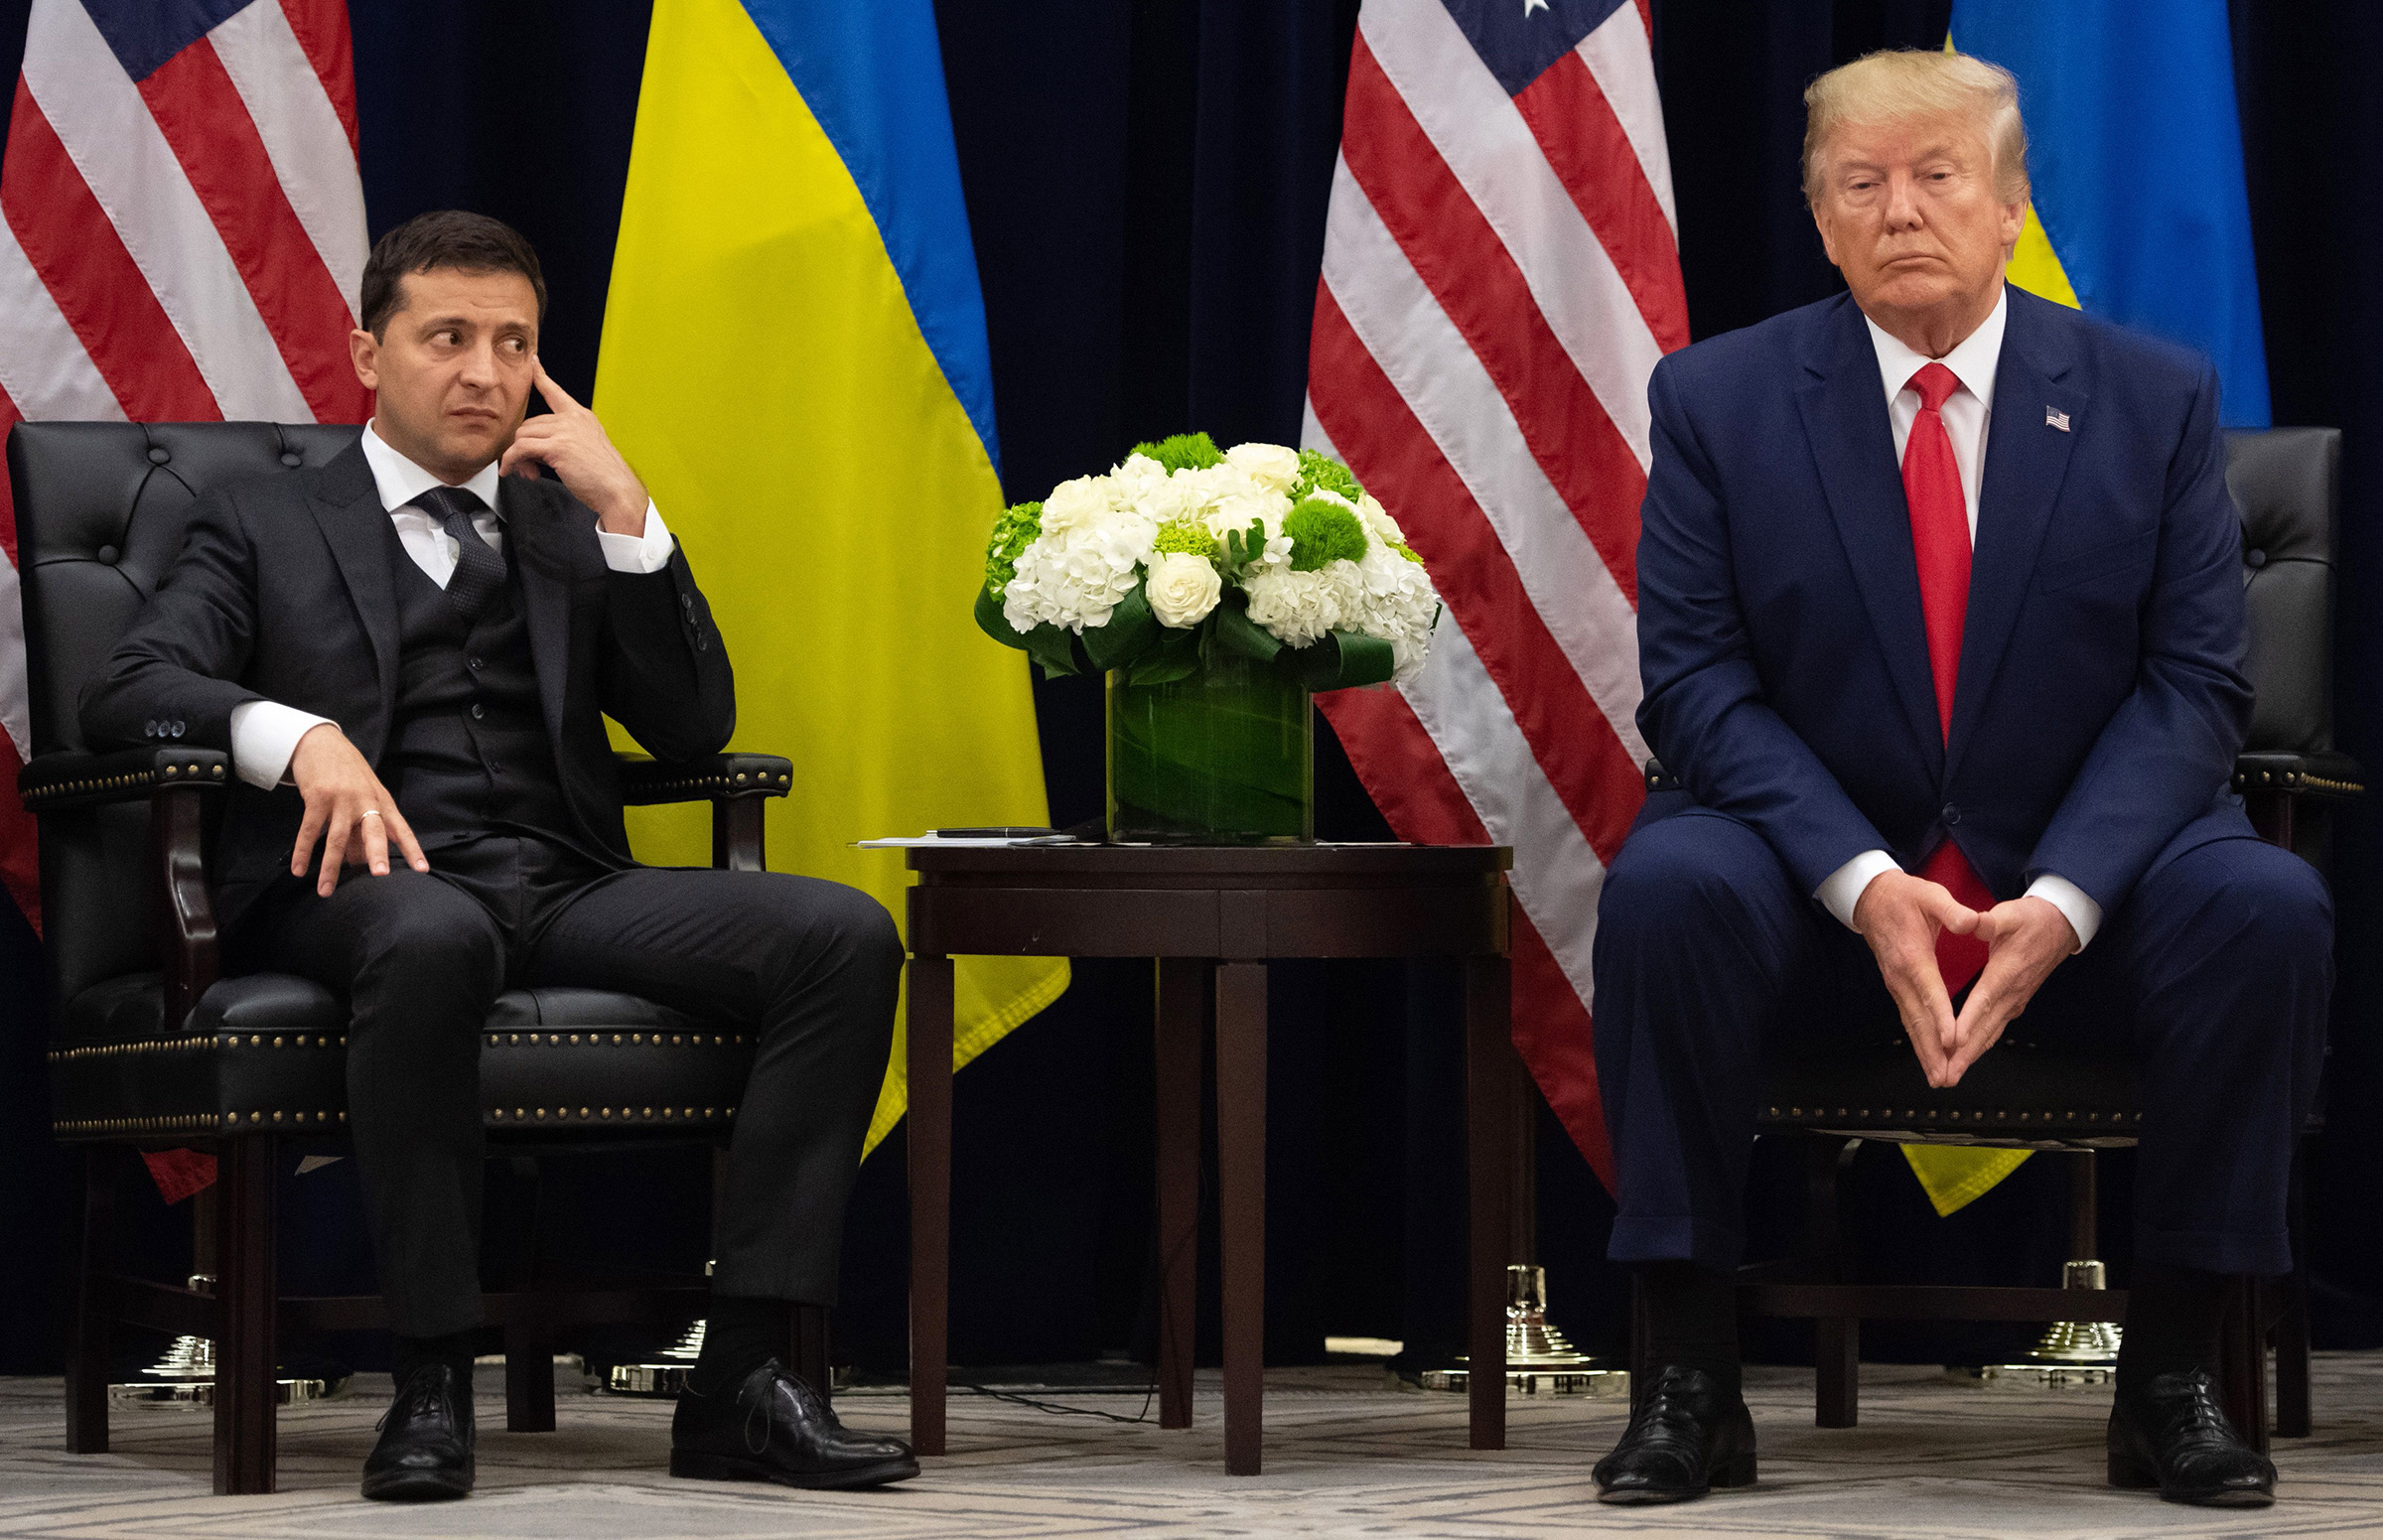 US President Donald Trump and Ukrainian President Volodymyr Zelensky looks on during a meeting in New York on September 25, 2019, in New York. (Saul Loeb—AFP/Getty Images)